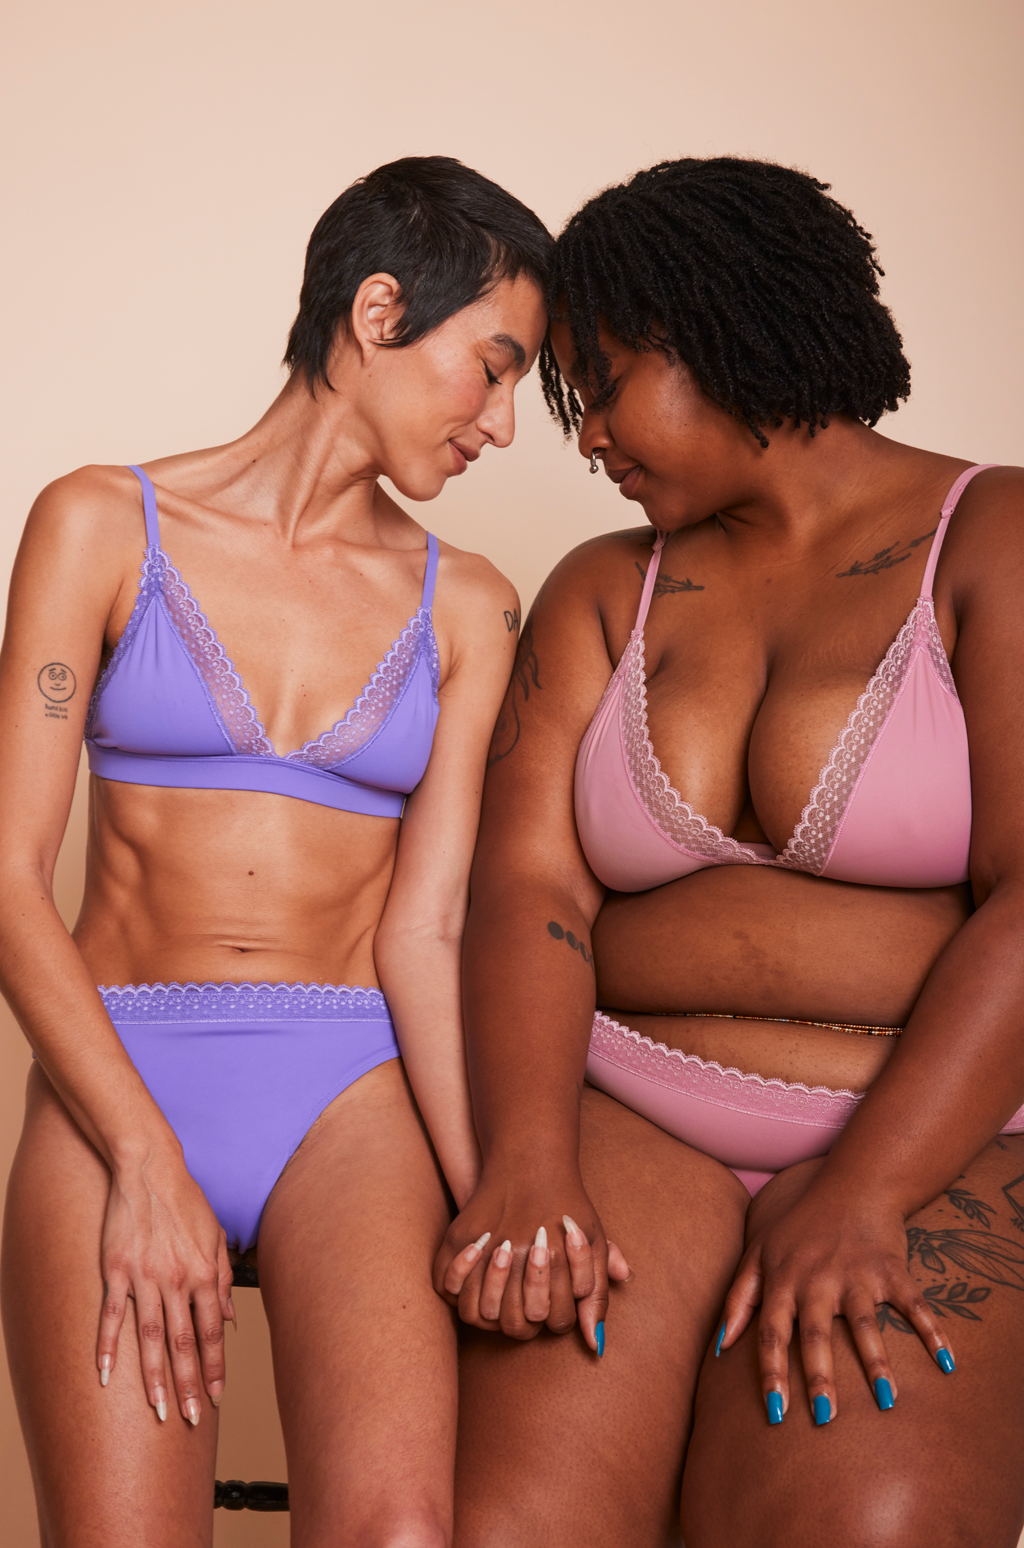 Urbody Lace Bralette and Lace Compression Thong Sets in Dahlia and Rosewater